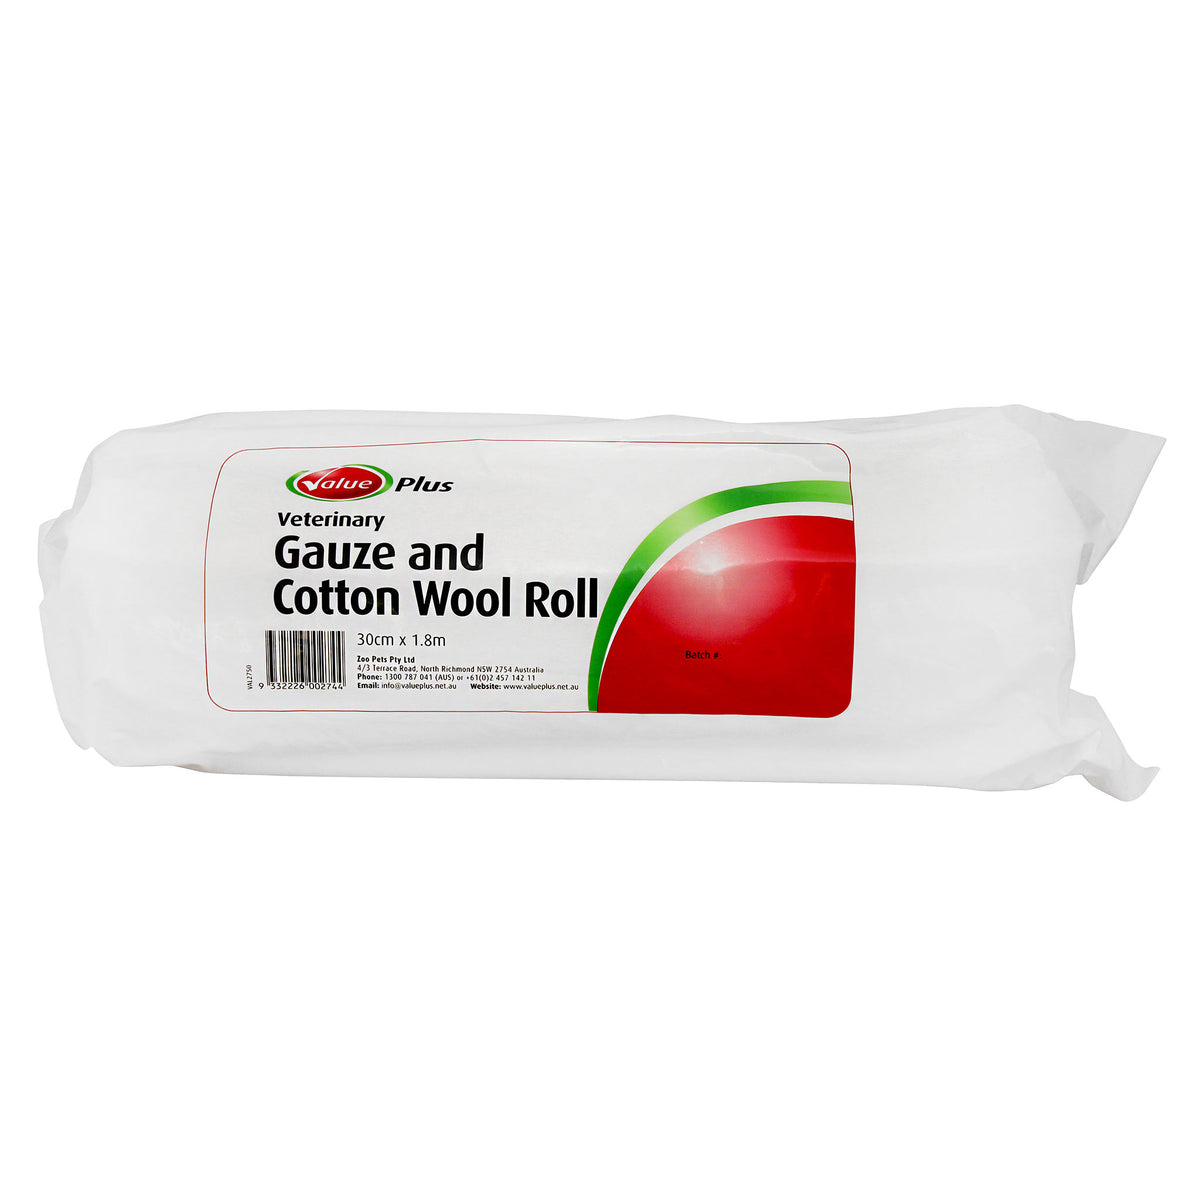 Value Plus Gauze and Cotton Wool Roll 30cm x 1.8m